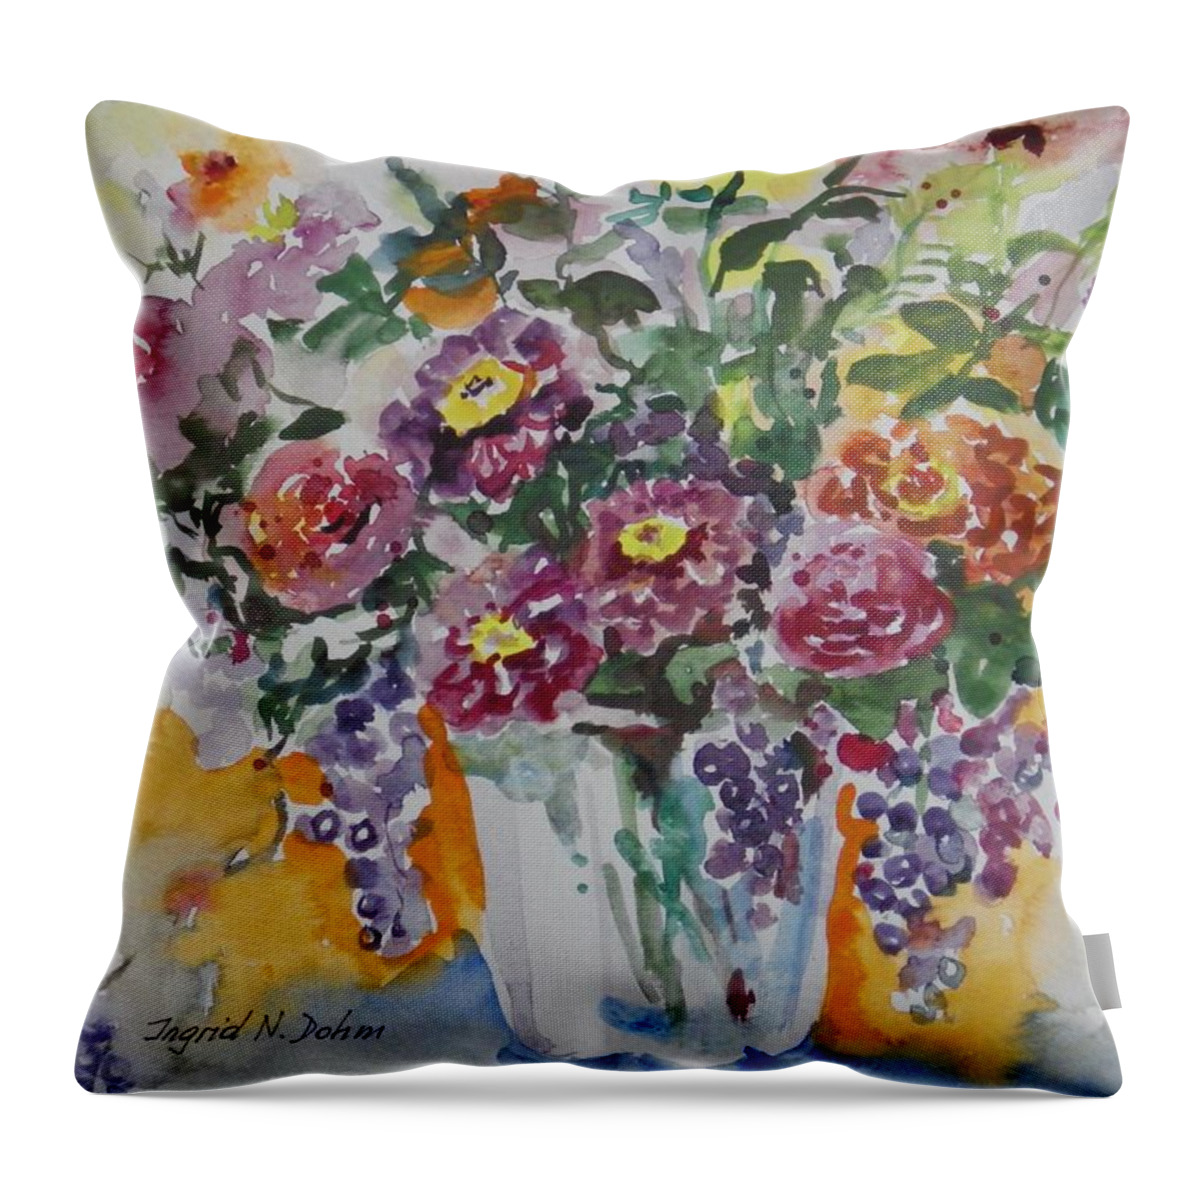 Flowers Throw Pillow featuring the painting Watercolor Series 206 by Ingrid Dohm